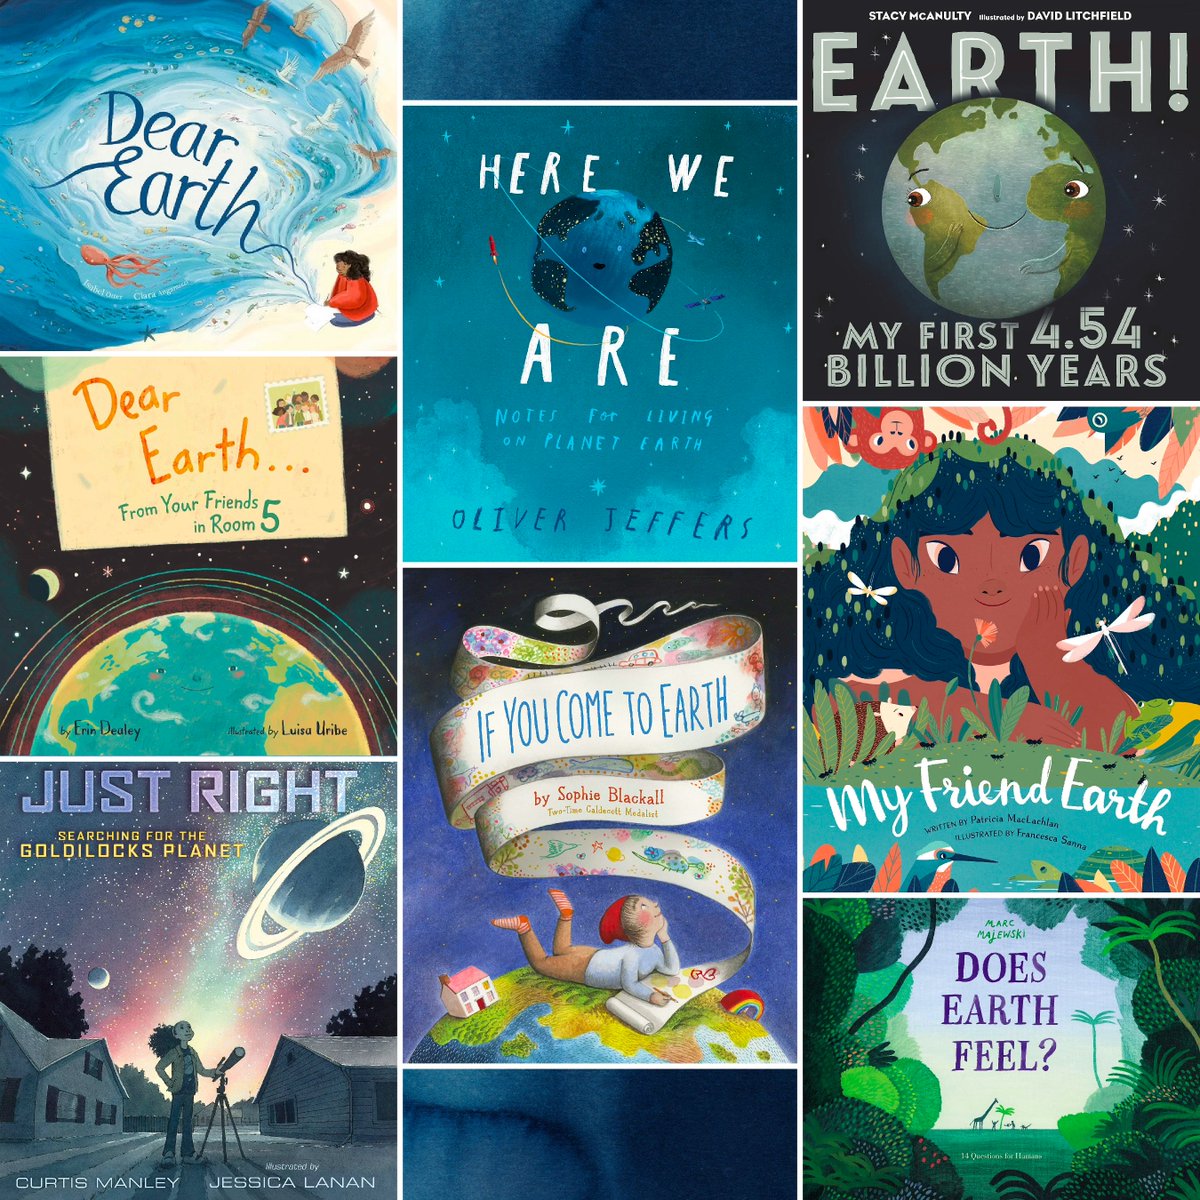 Celebrate #EarthDay with these fun #PictureBooks. bit.ly/4b82eFF